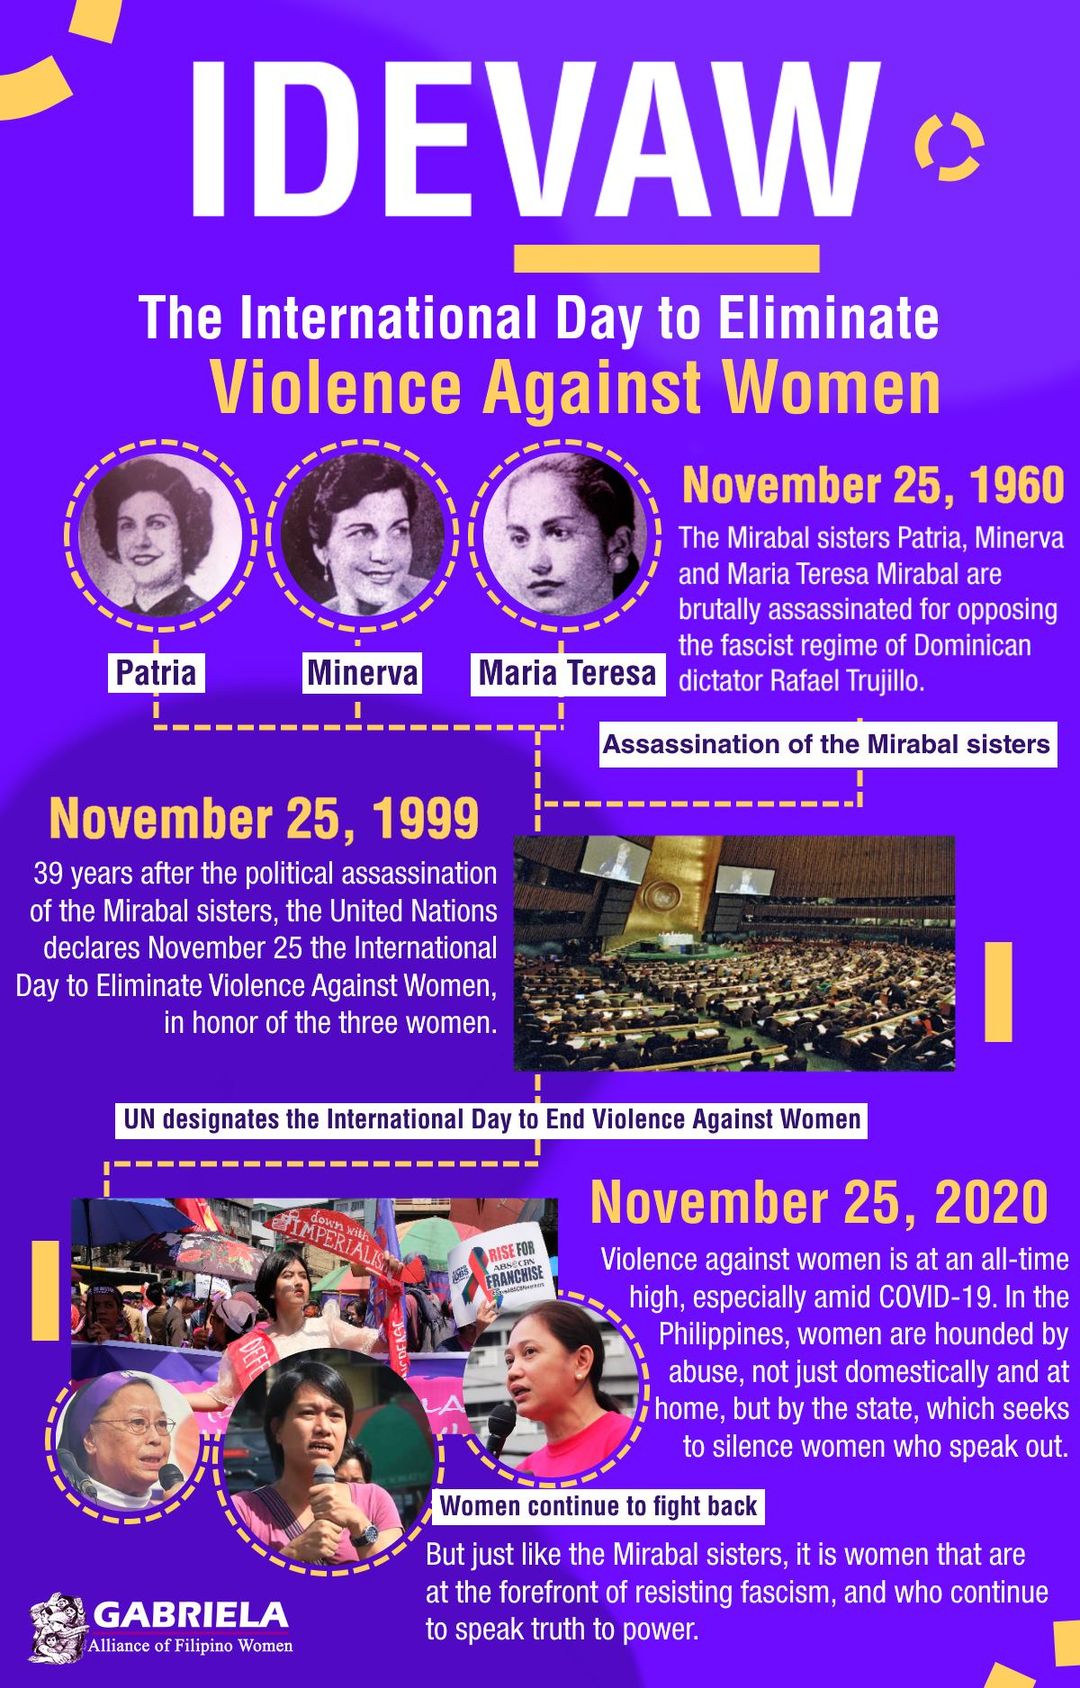 OBR Actions for The International Day To Eliminate Violence Against Women – India, Mexico, Philippines, South Asia - One Billion Rising Revolution